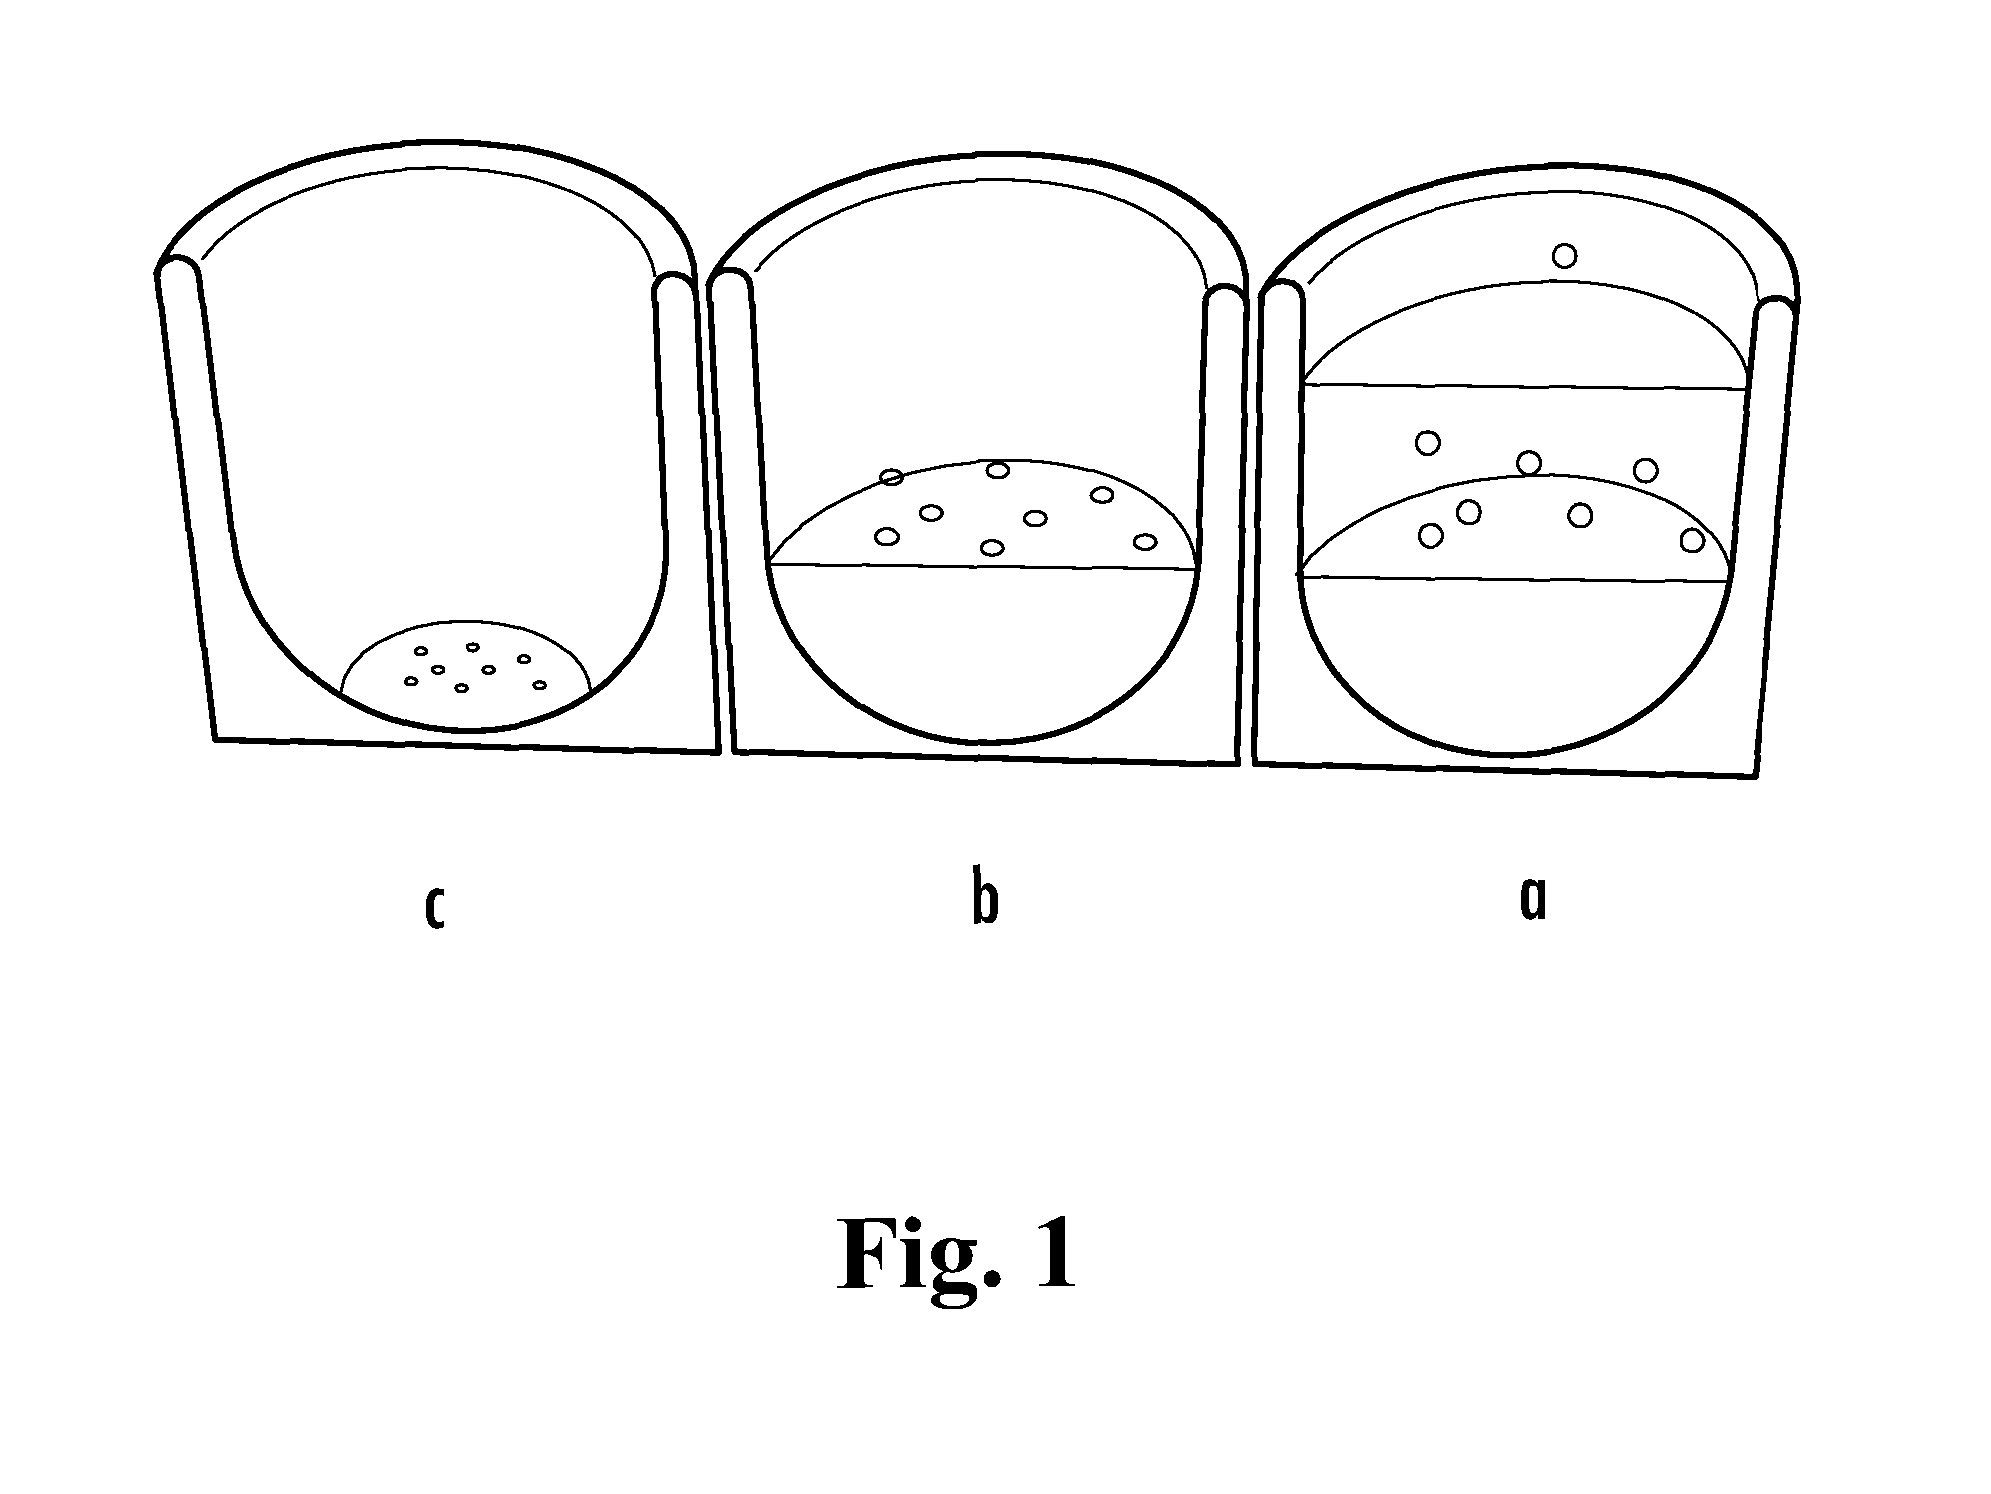 Loadable polymeric particles for enhanced imaging in clinical applications and methods of preparing and using the same